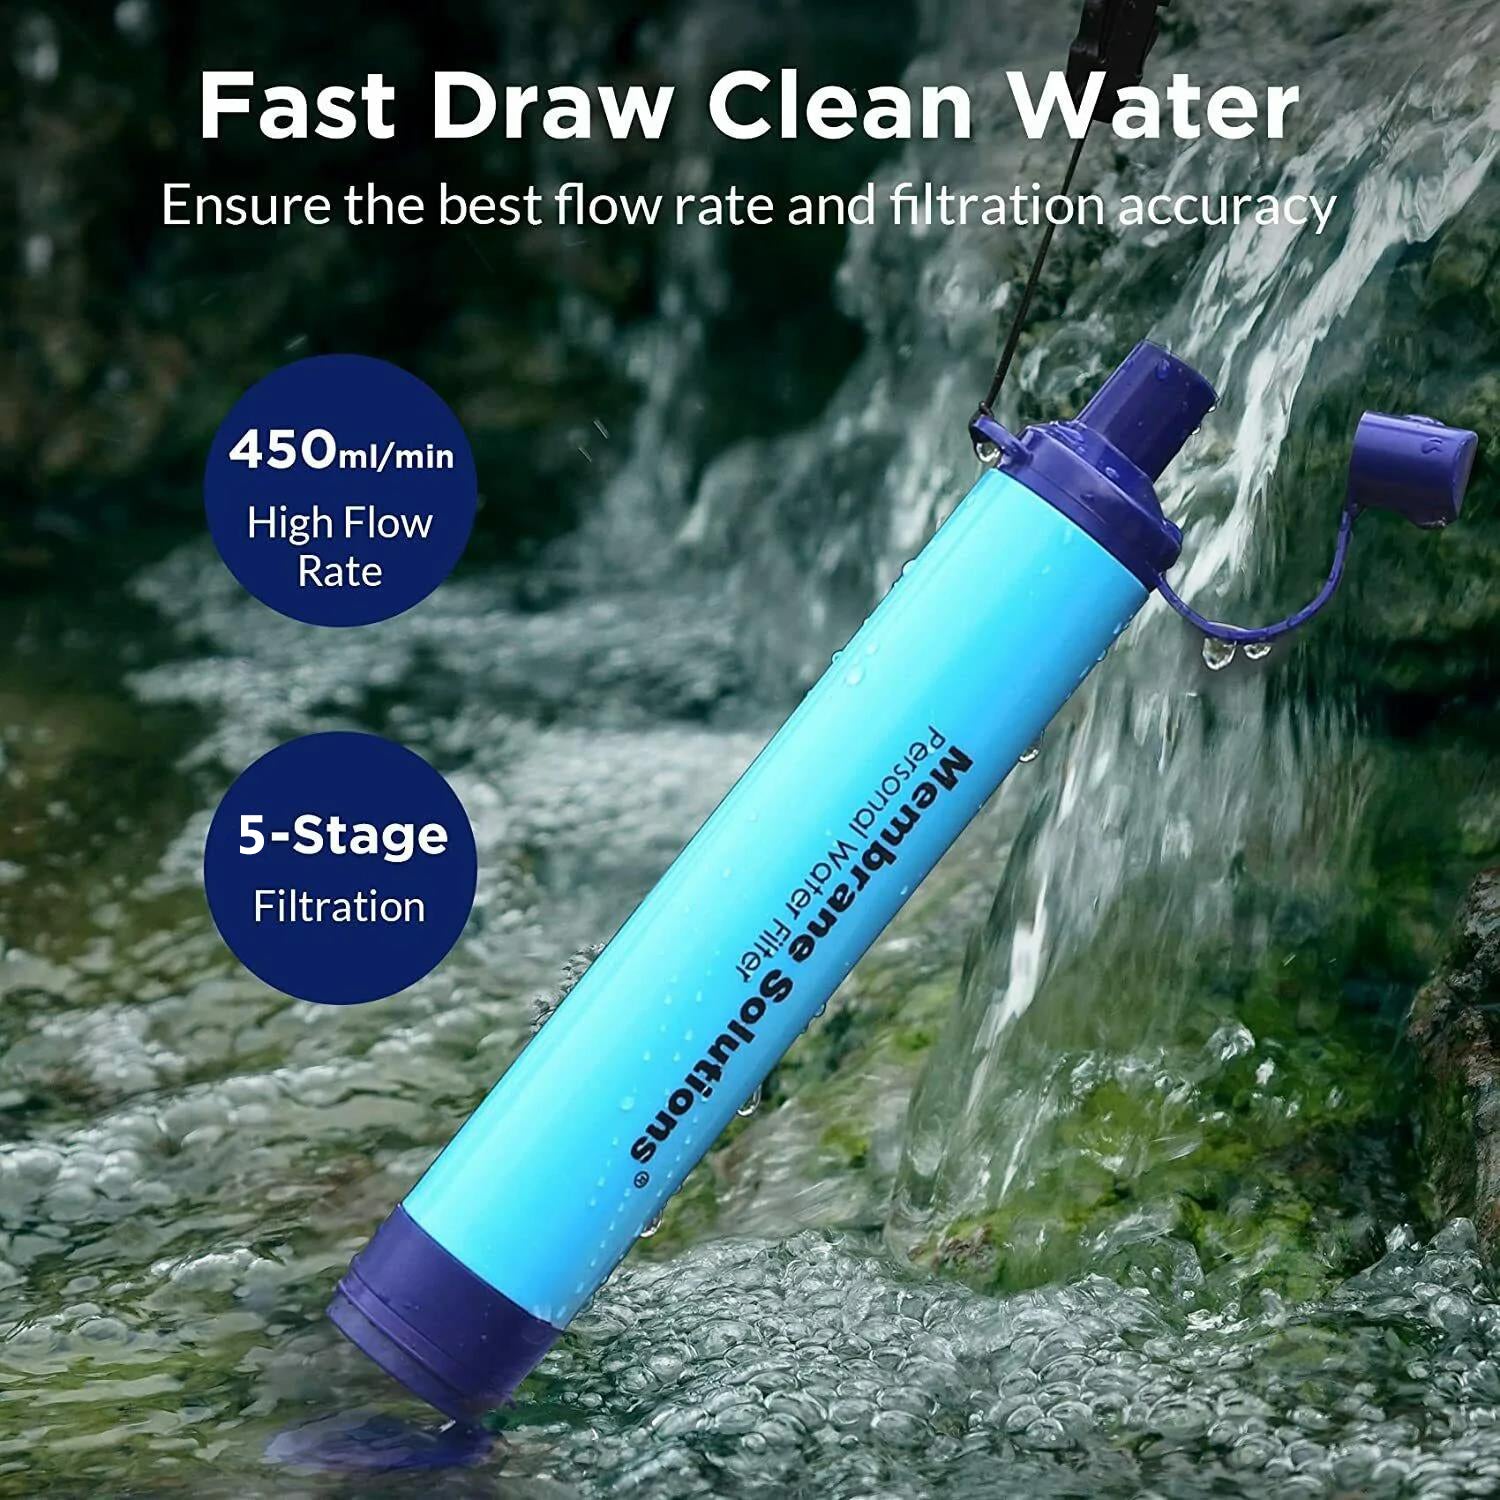 Survival Water Filter with a Survival Straw Water Filtration System